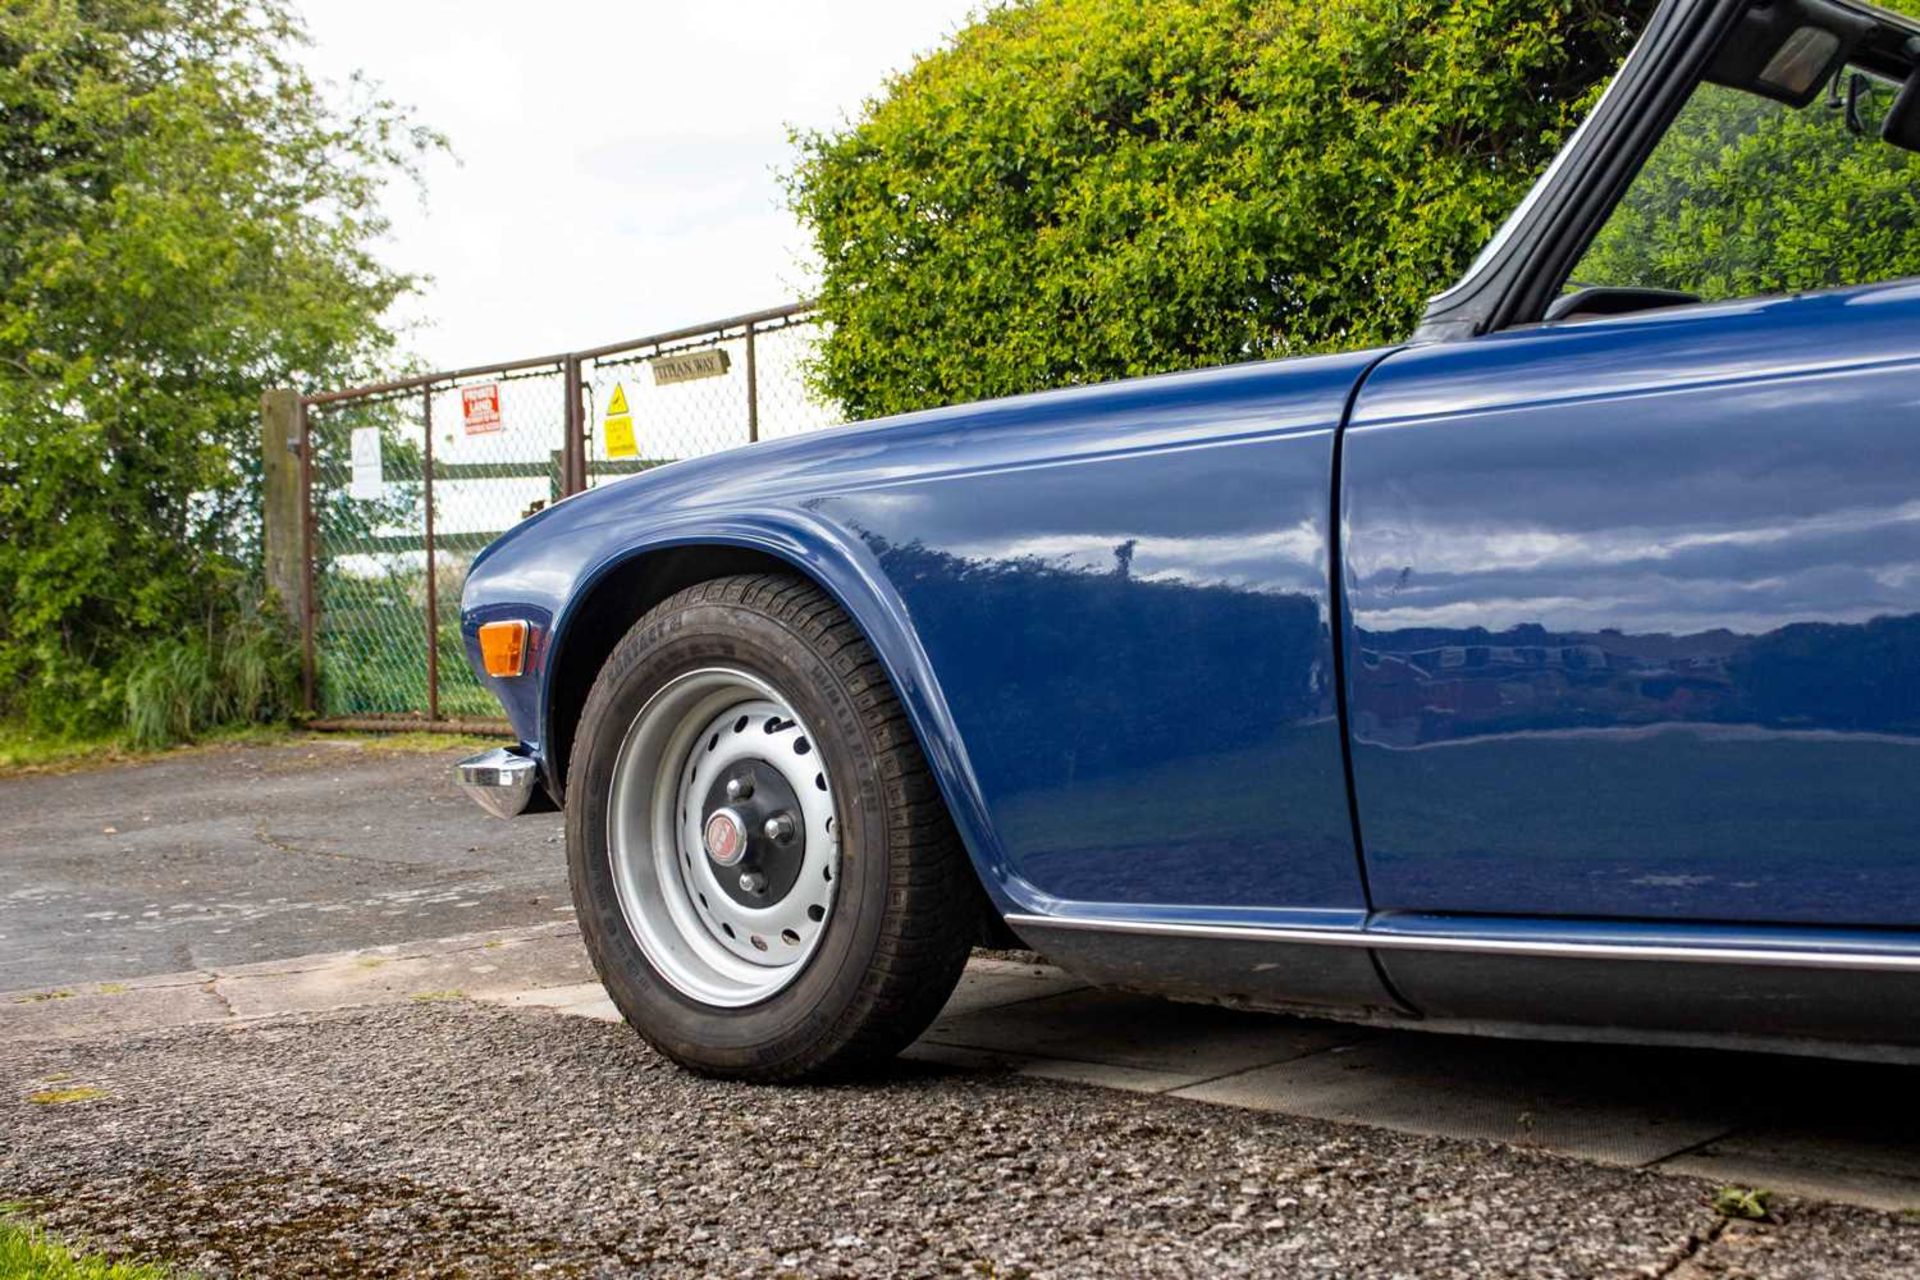 1972 Triumph TR6 Home market example, specified with manual overdrive transmission - Image 42 of 95